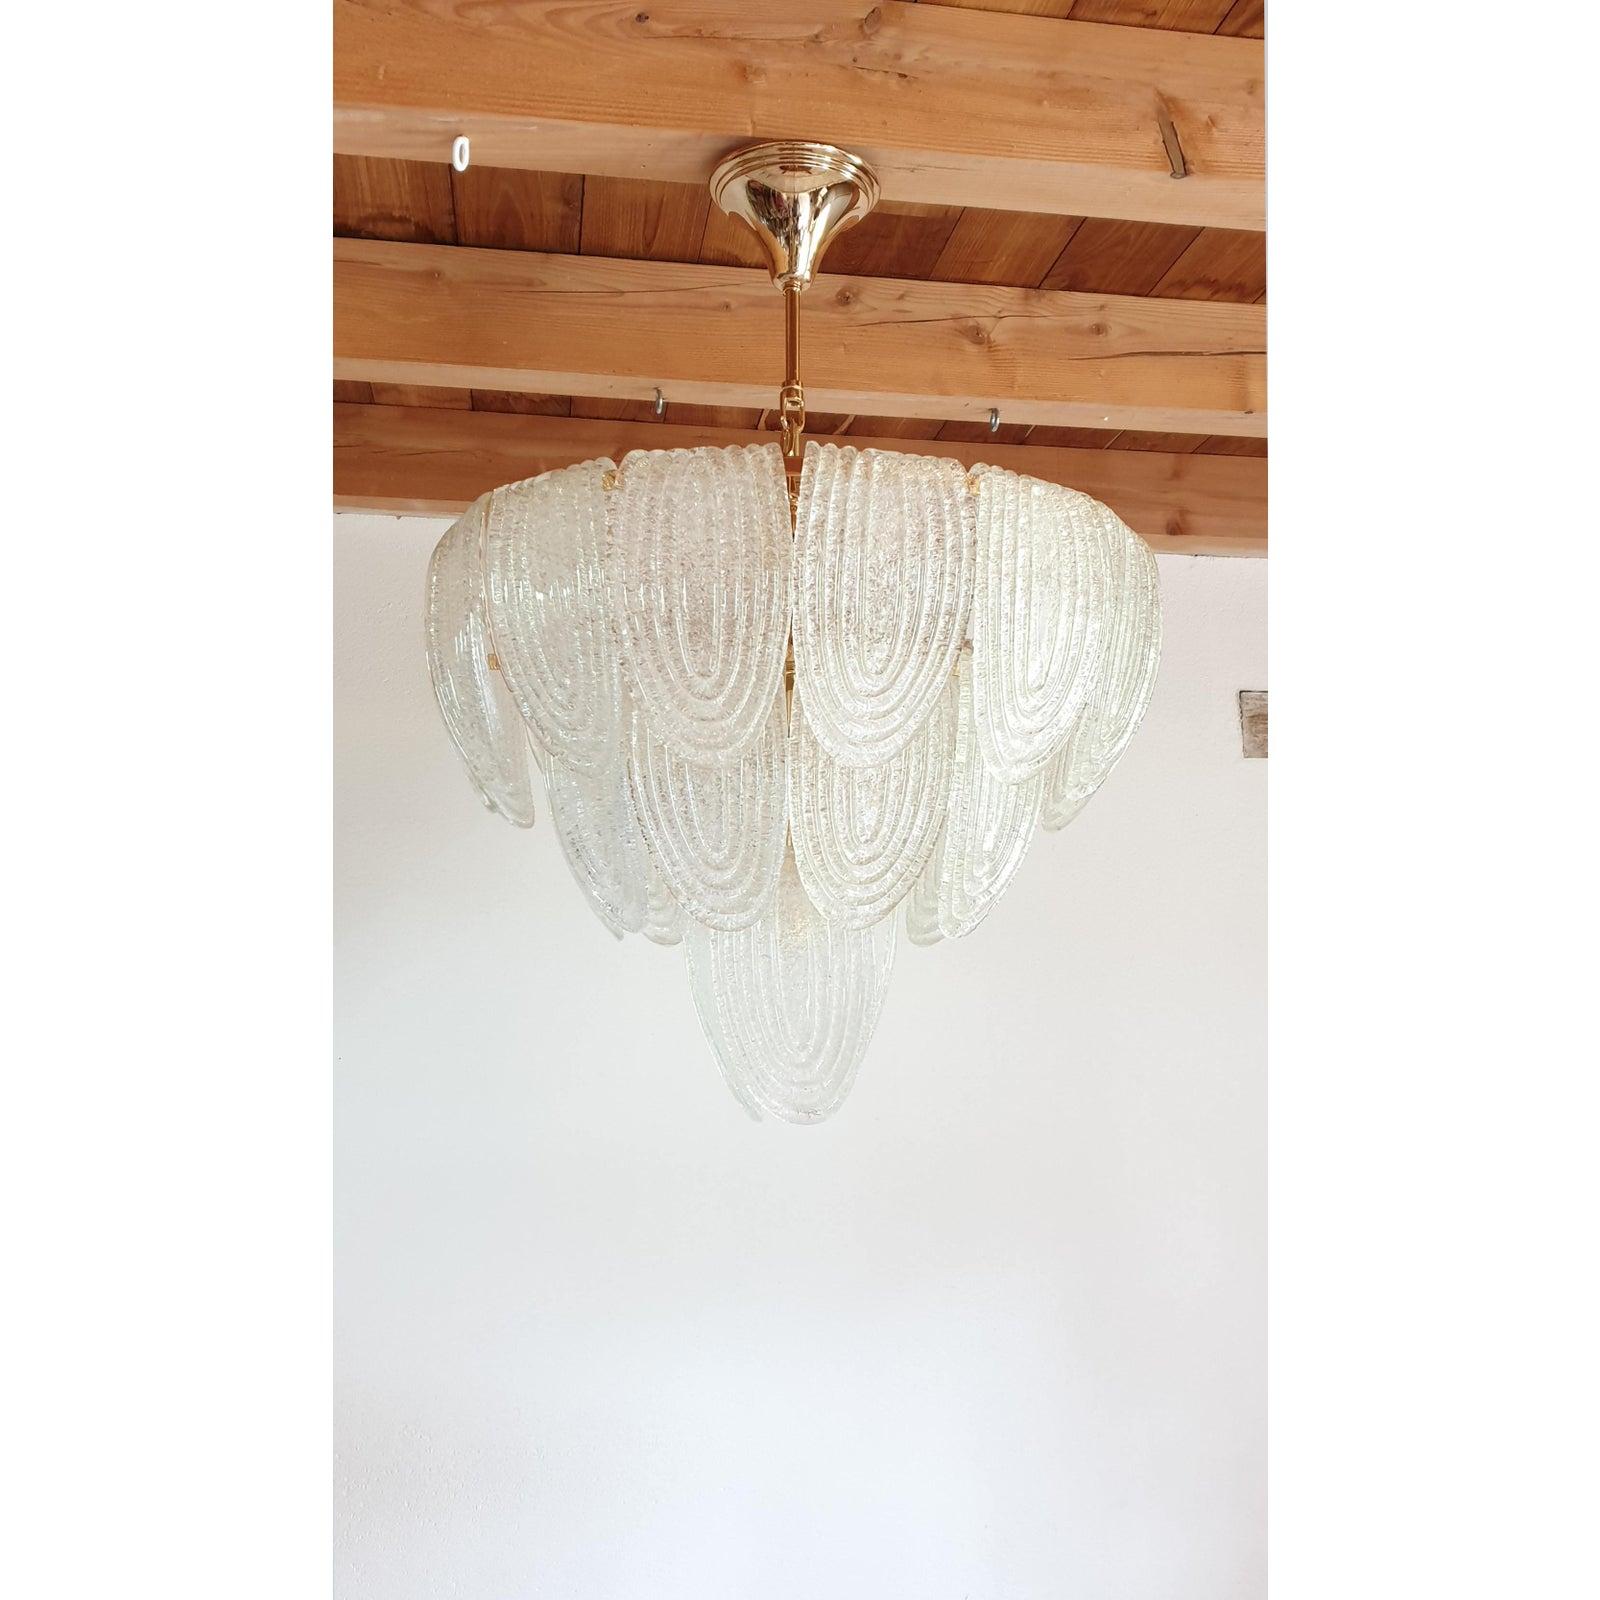 Mid-Century Modern translucent and textured Murano glass chandelier, with gold-plated frame, attributed to Mazzega, Italy 1970s.
Two chandeliers available: priced and sold individually.
The vintage Italian chandelier can also be hanged as a flush